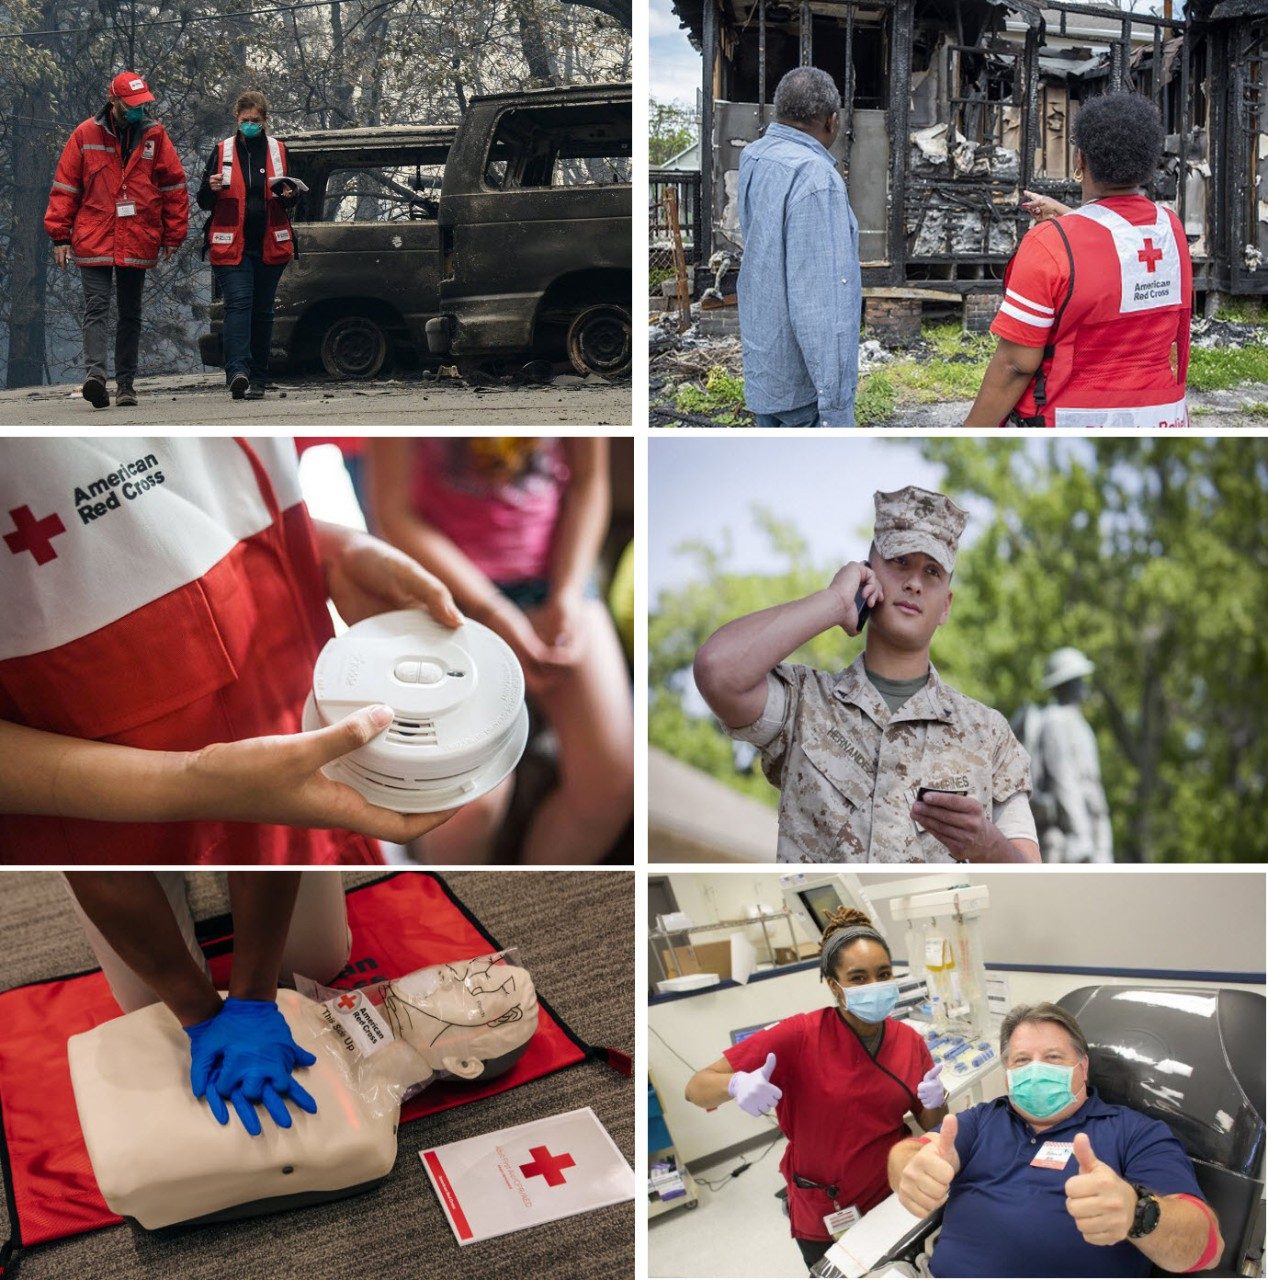 Collage of Red Cross volunteers and military person